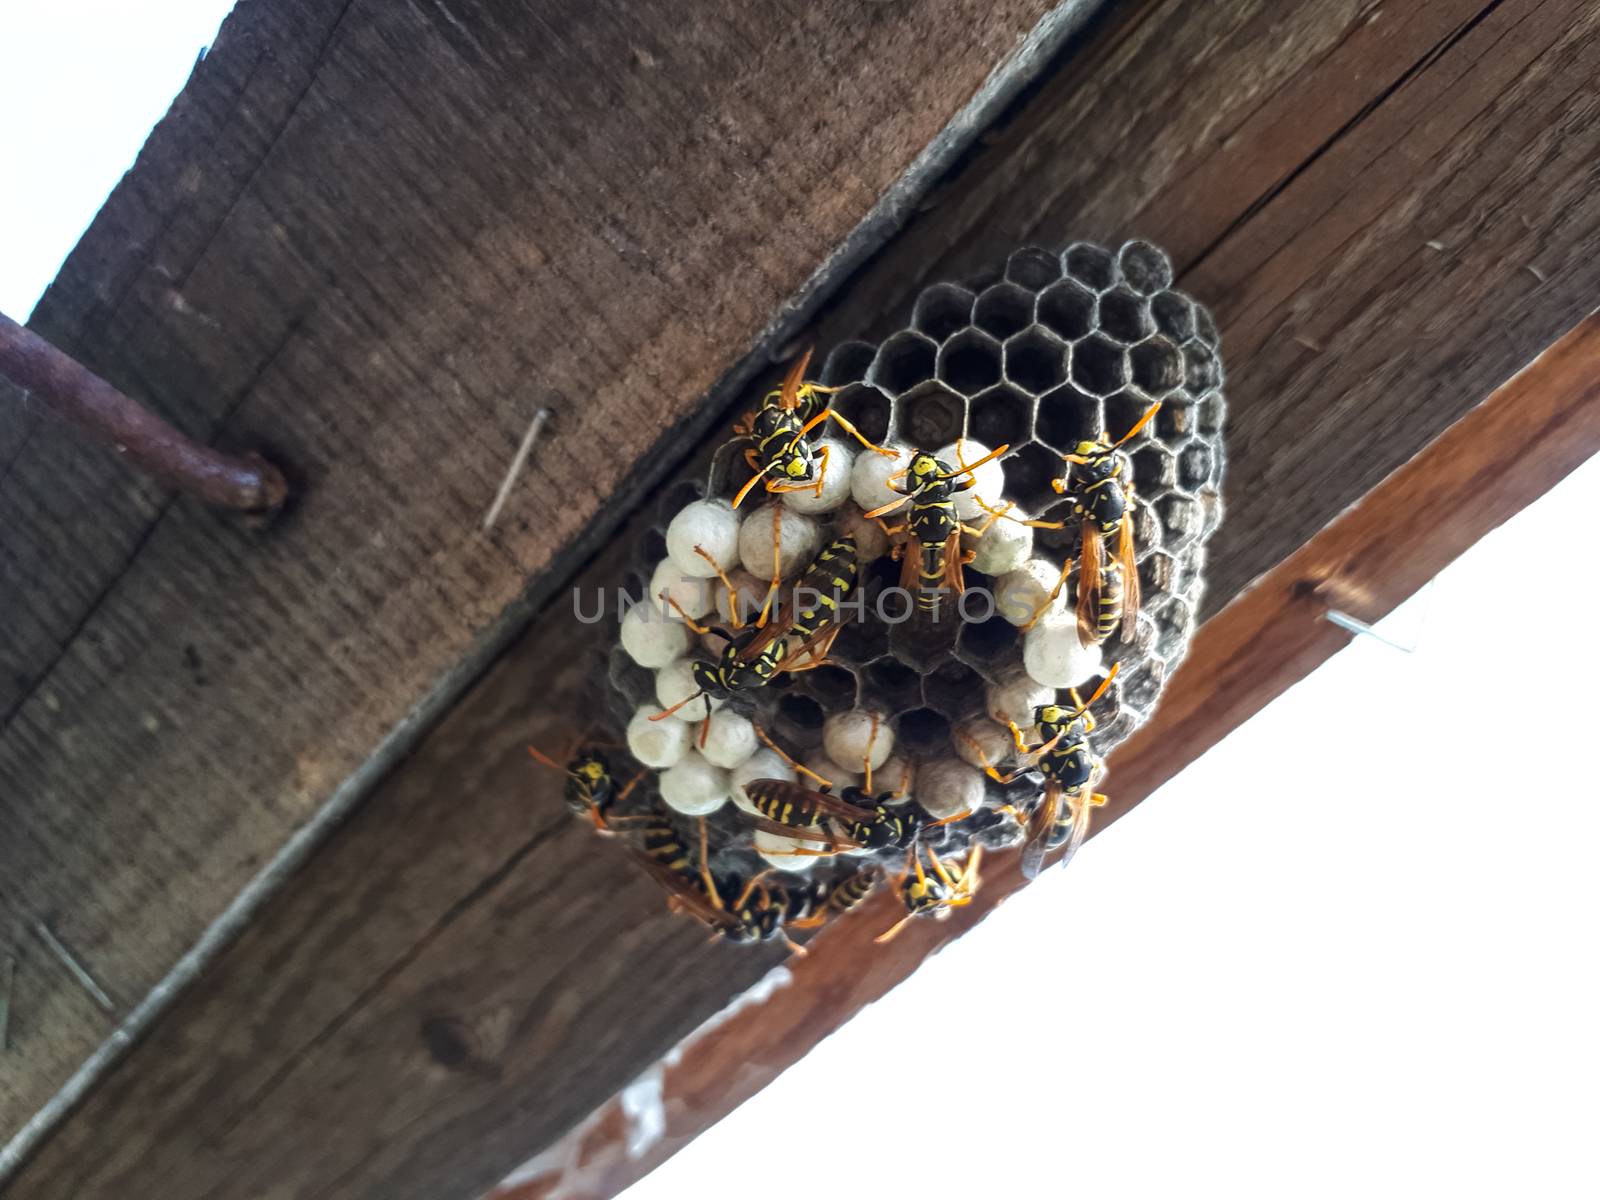 Wasps are polys, nest wasps on board under the roof. by fedoseevaolga